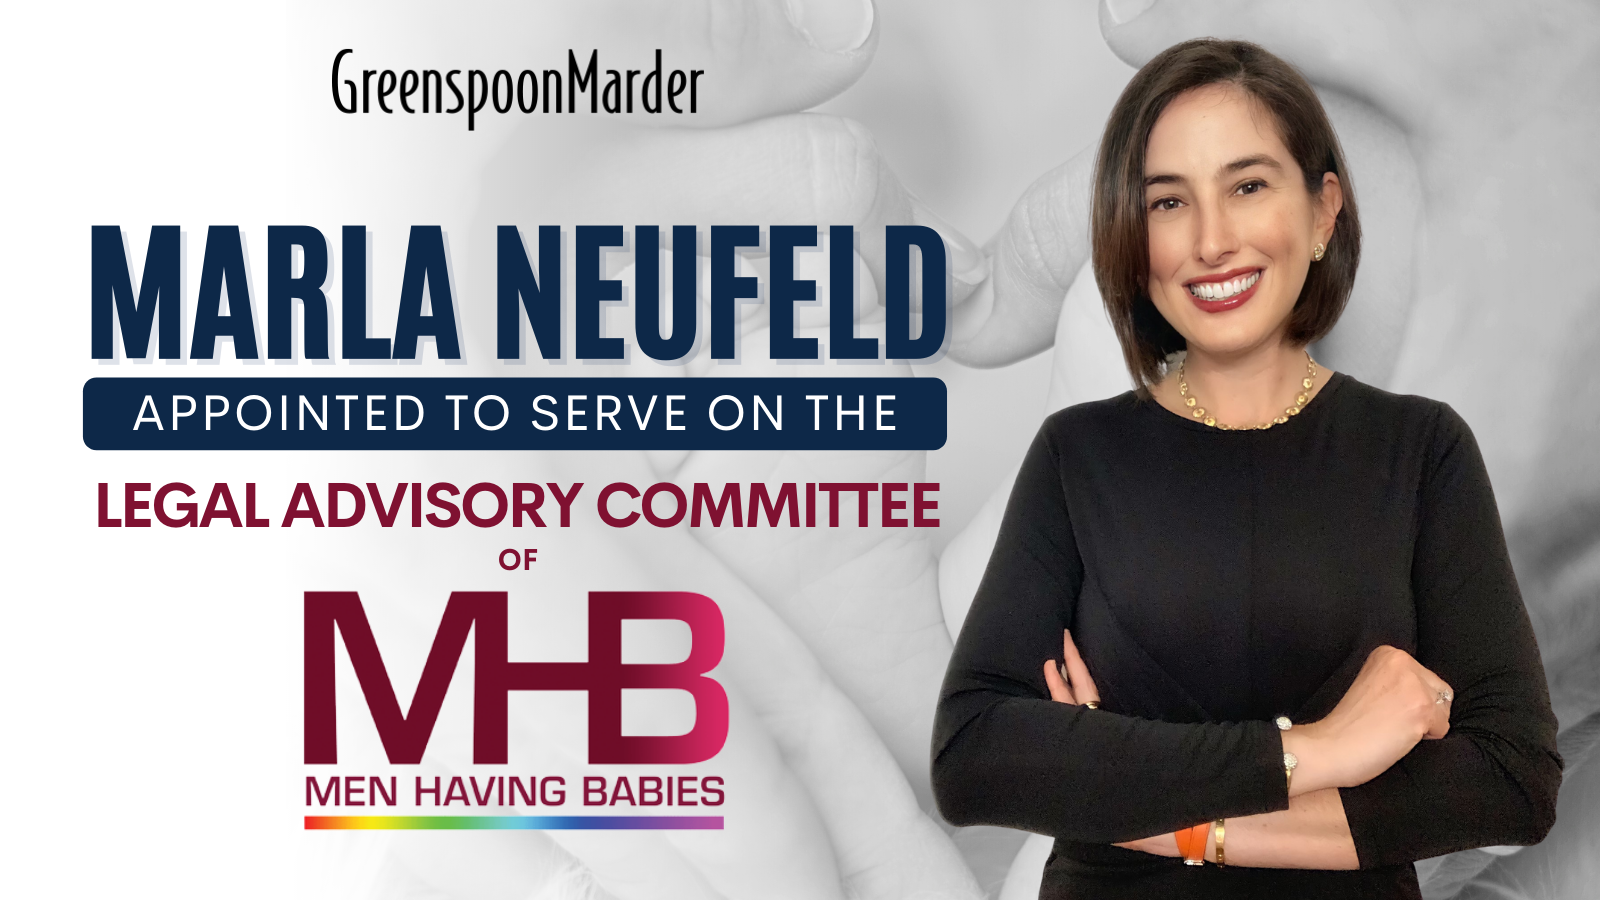 Greenspoon Marder Surrogacy And Assisted Reproductive Partner Marla